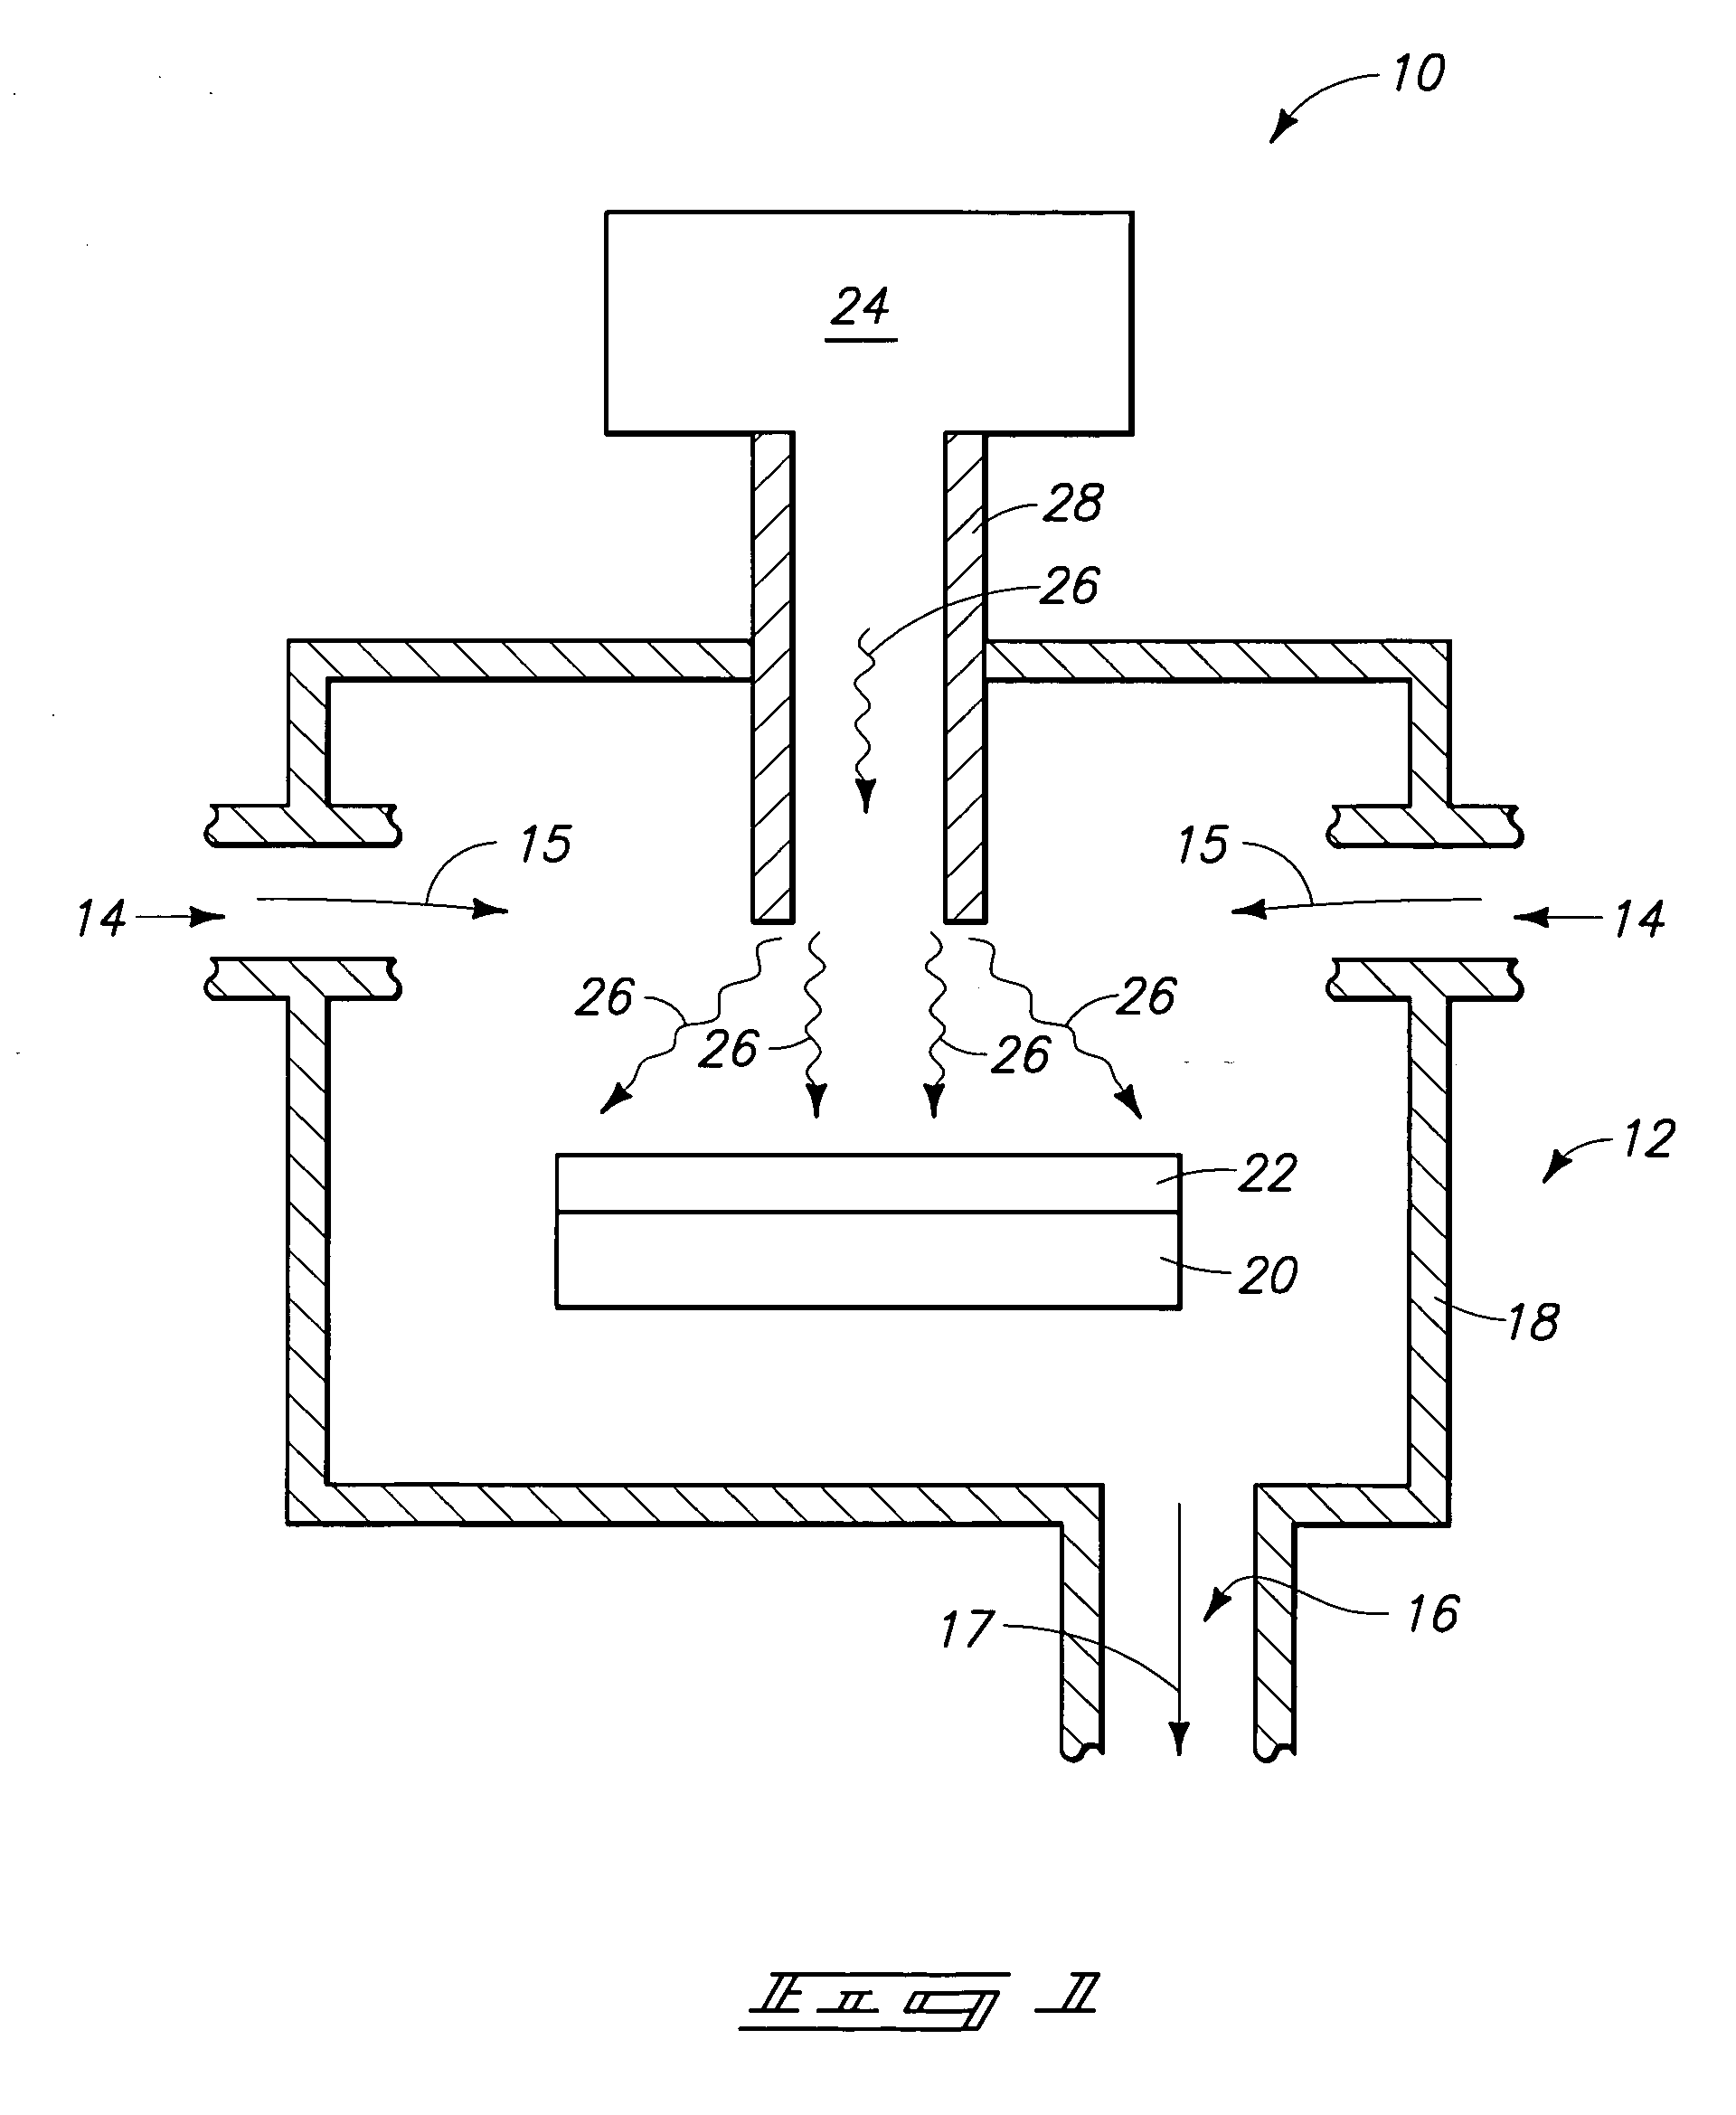 Atomic layer deposition methods and chemical vapor deposition methods